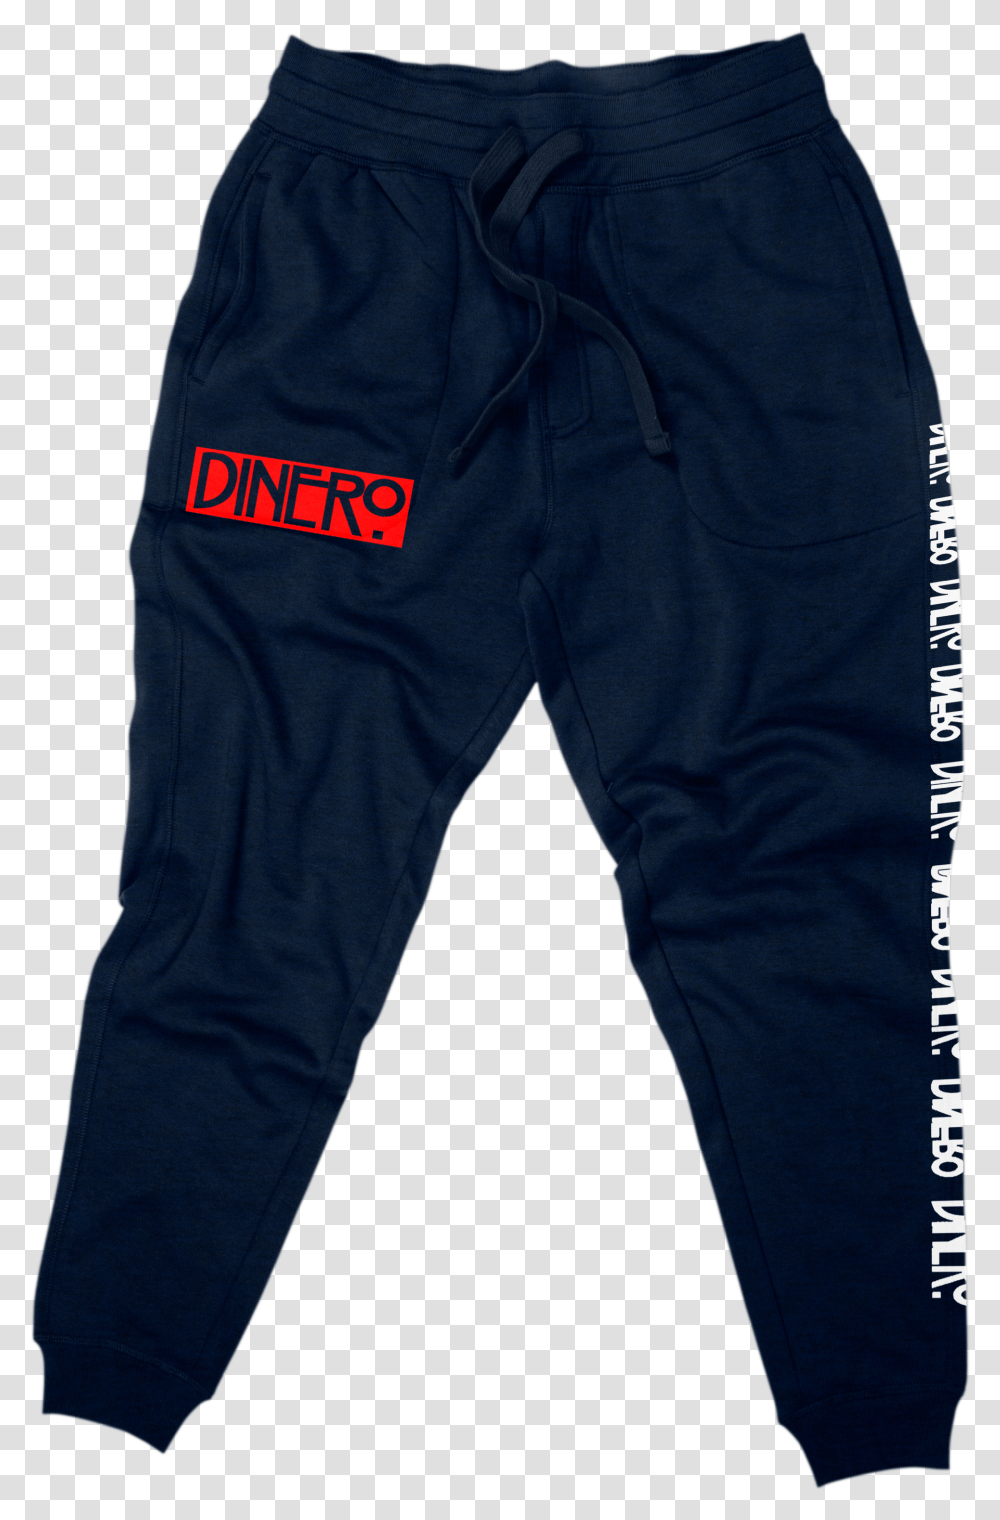 Image Of Navy Blue Dinero Clothing Joggers Pocket Transparent Png